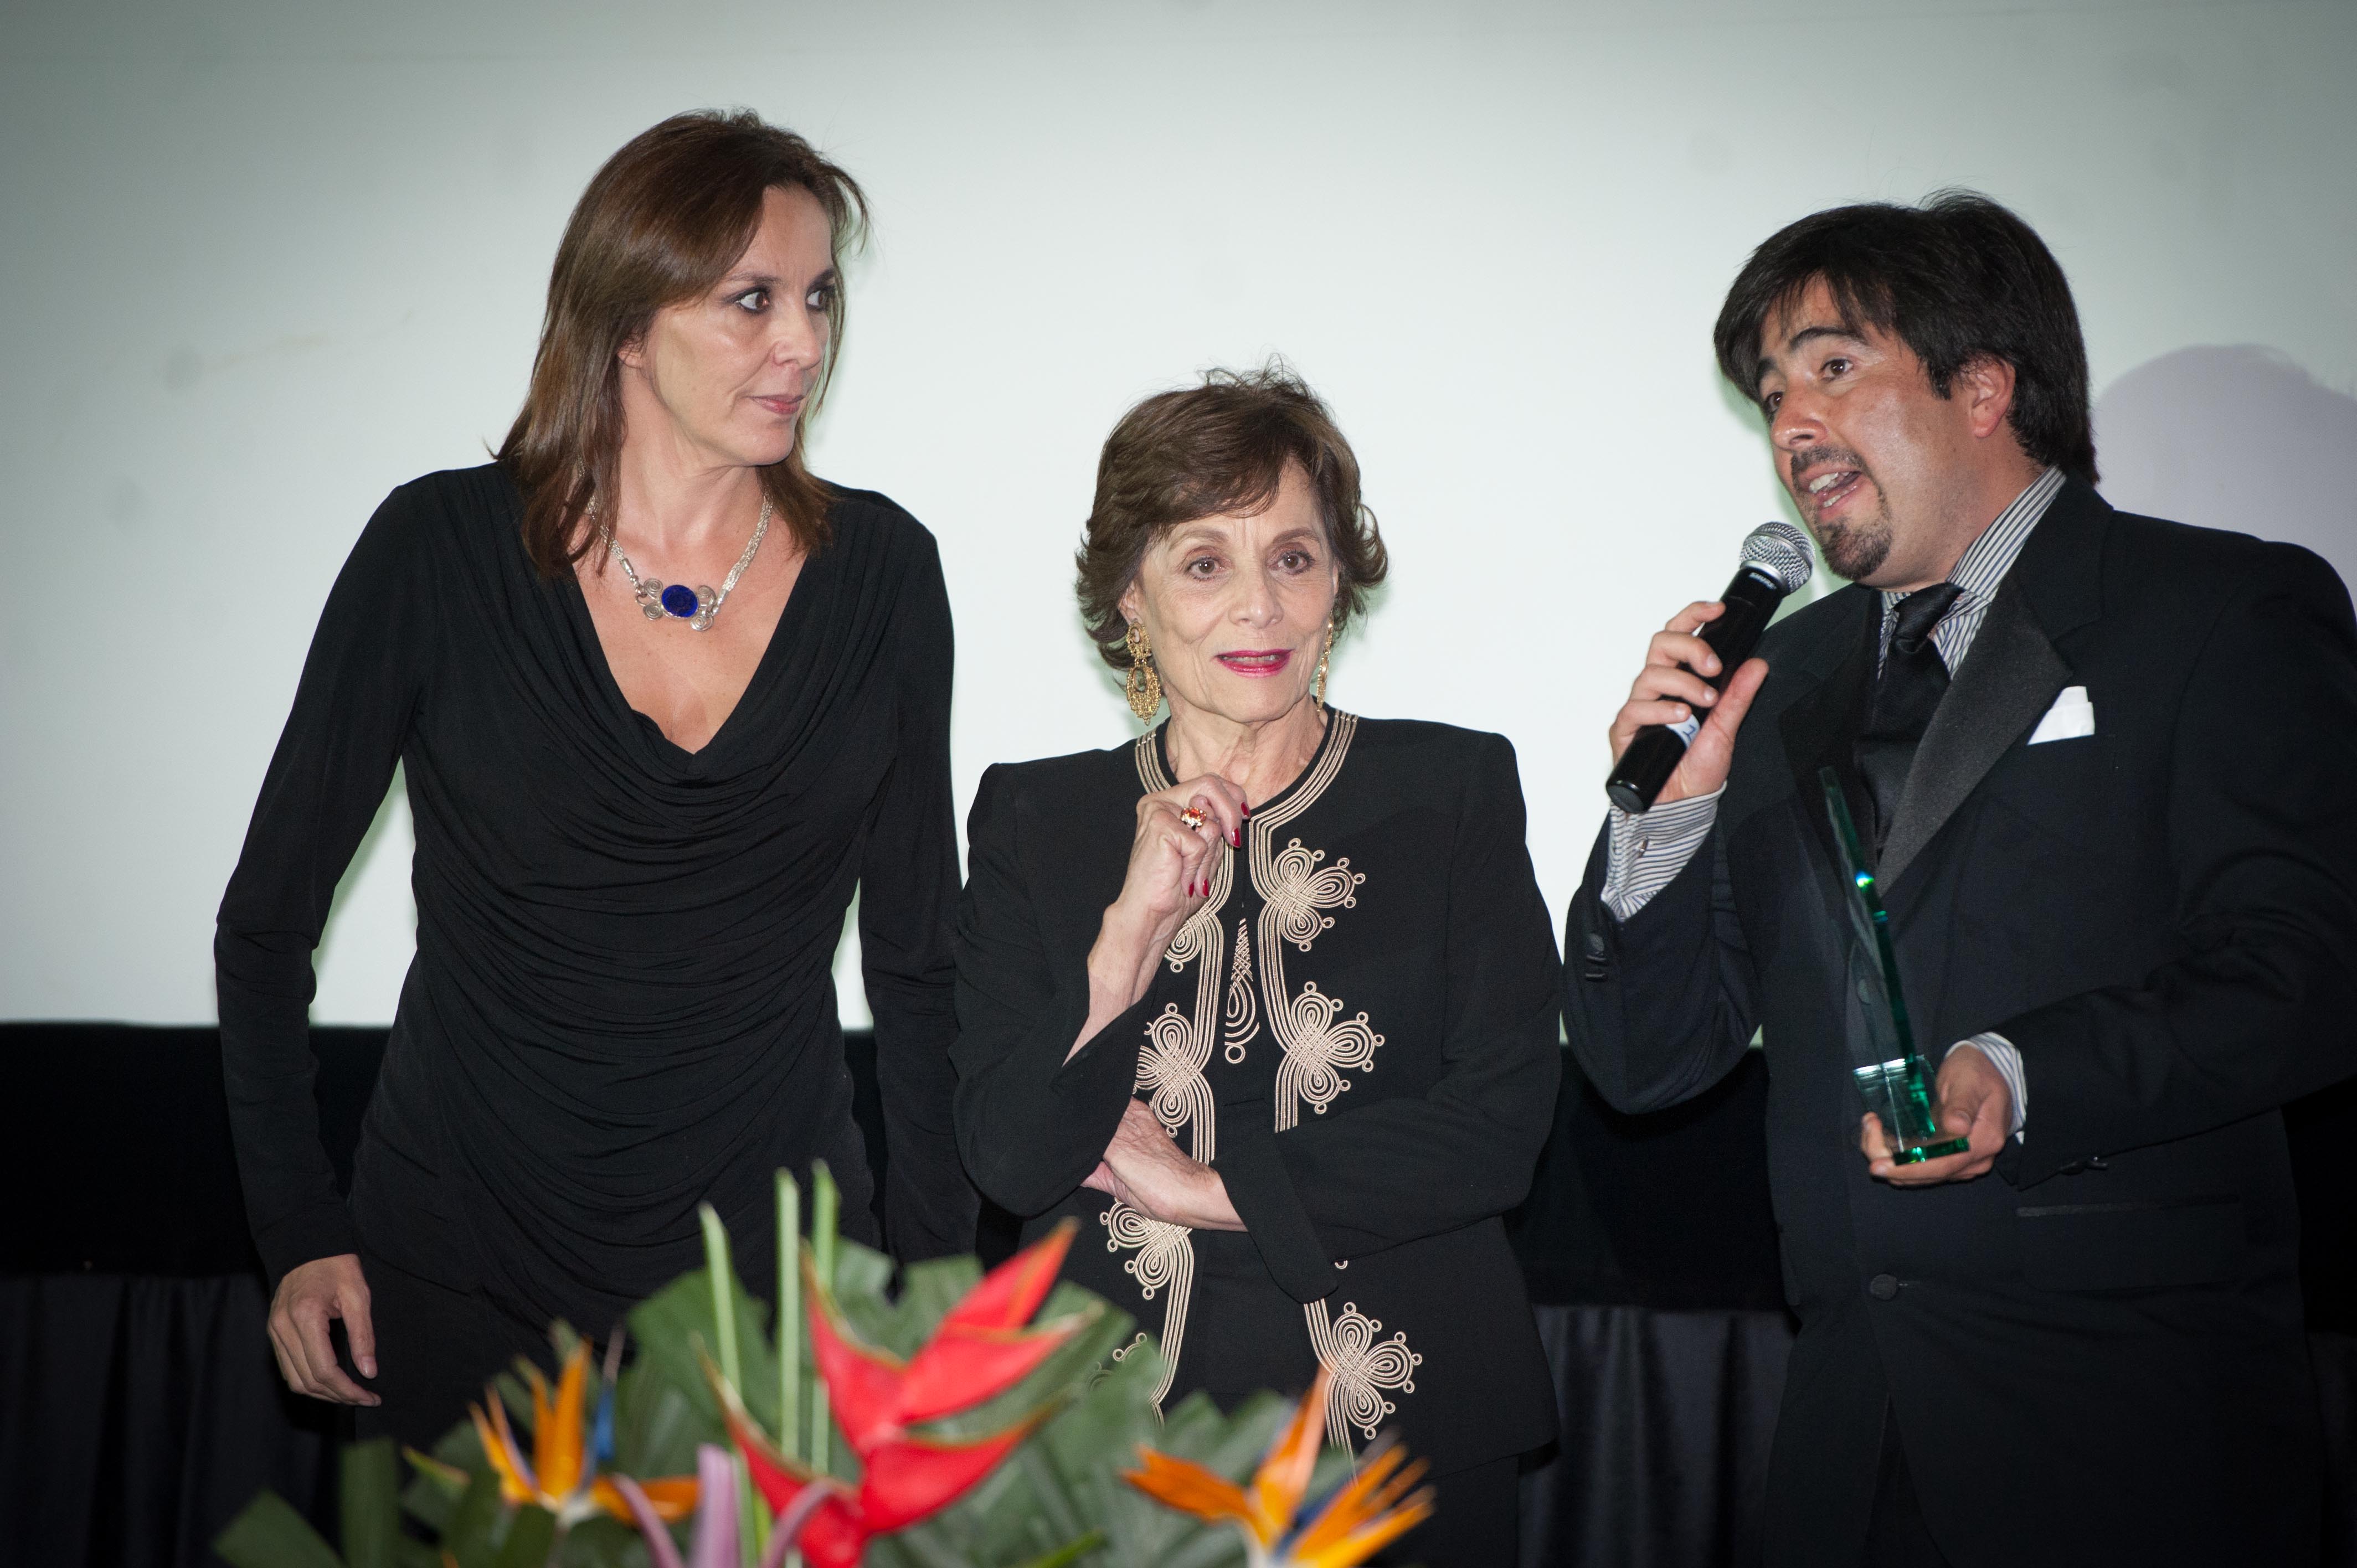 Actress Arianne Pellicer in the homage to her mother actress Pilar Pellicer with Pedro Araneda during the XIX Anniversary of the Mexican Association of Independent Filmmakers (AMCI)